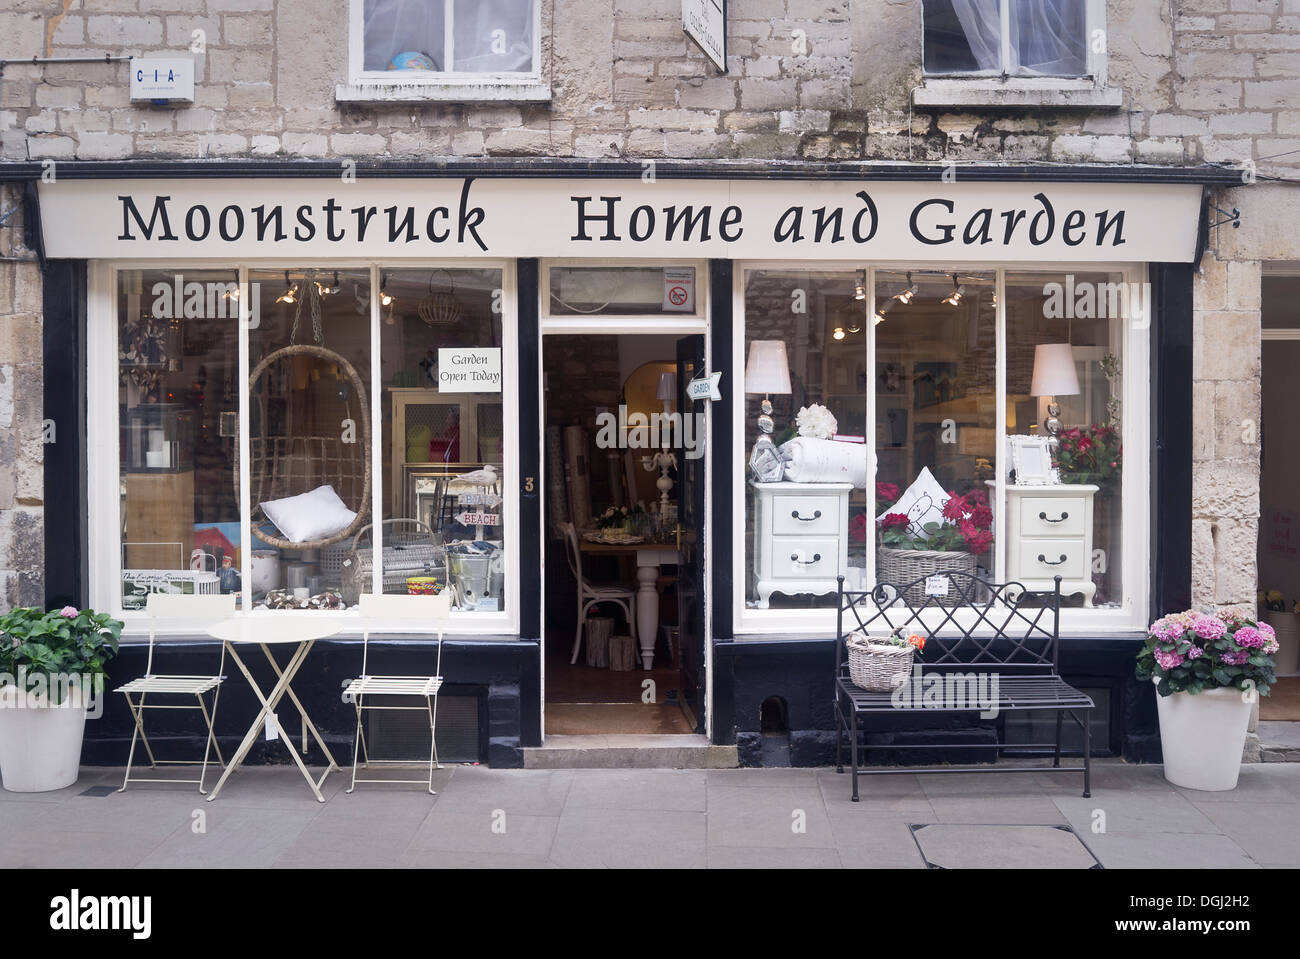 Moonstruck home and garden shop in Cirencester UK Stock Photo